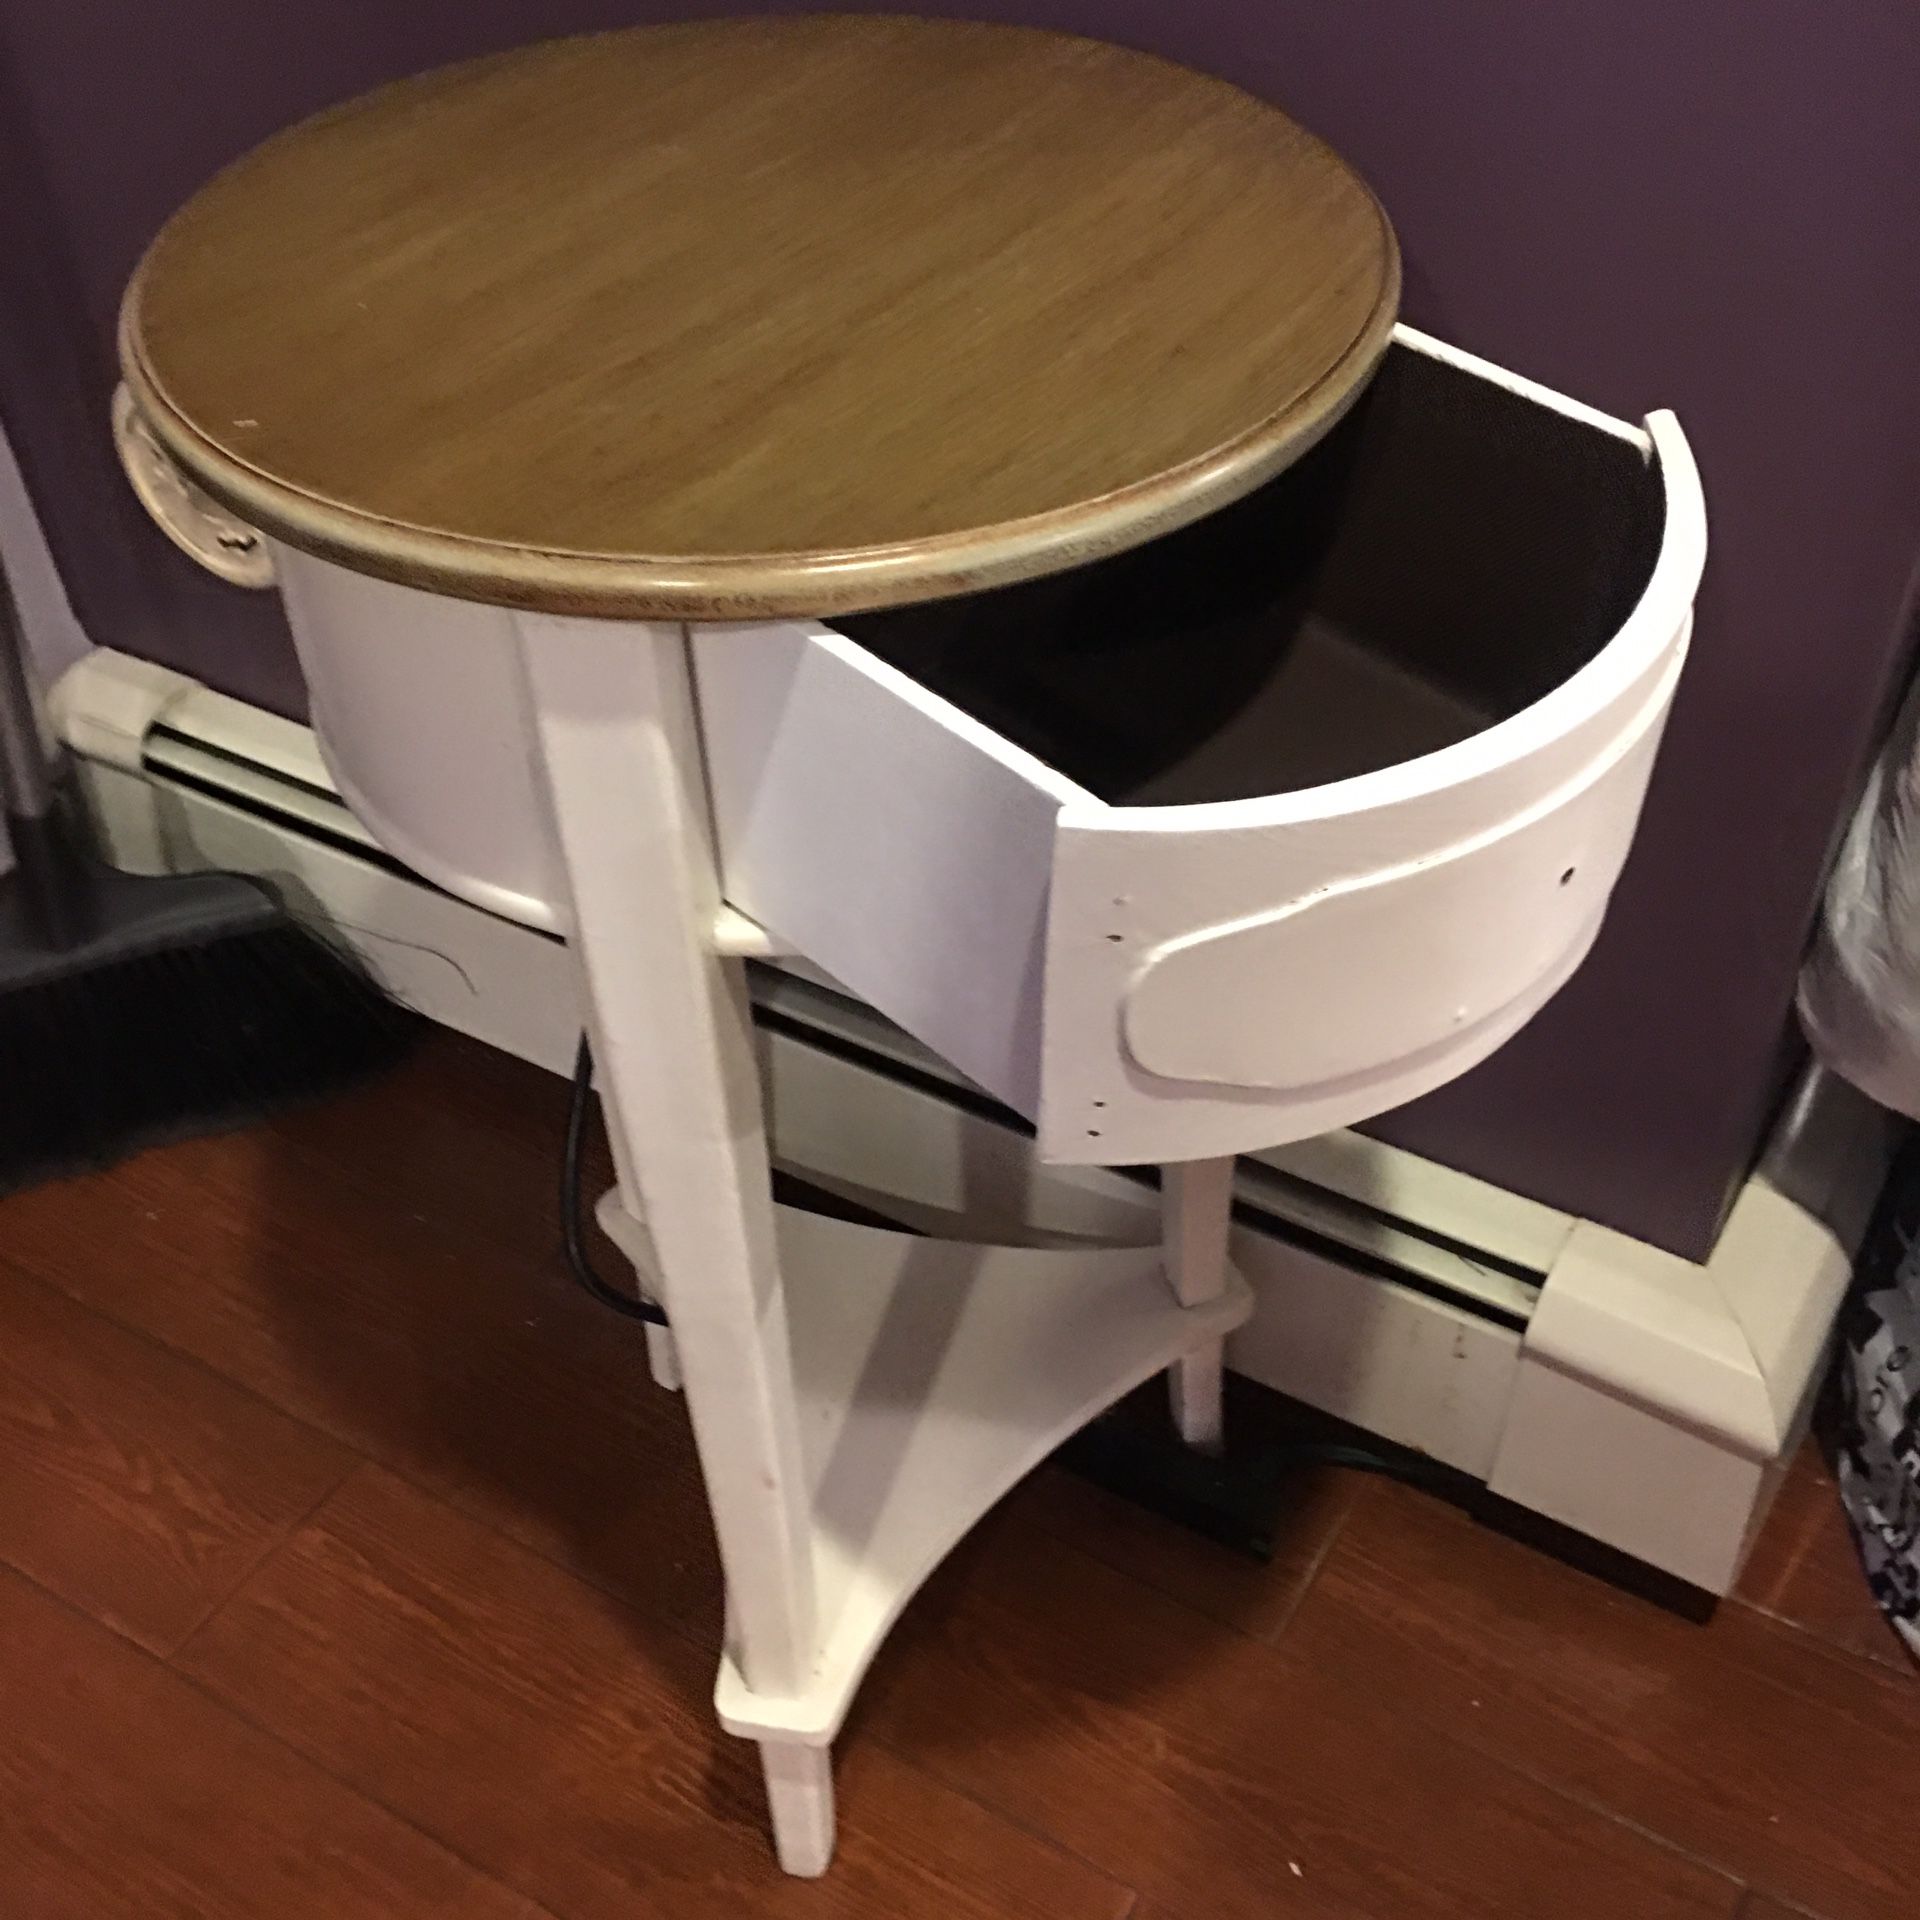 End table or corner table